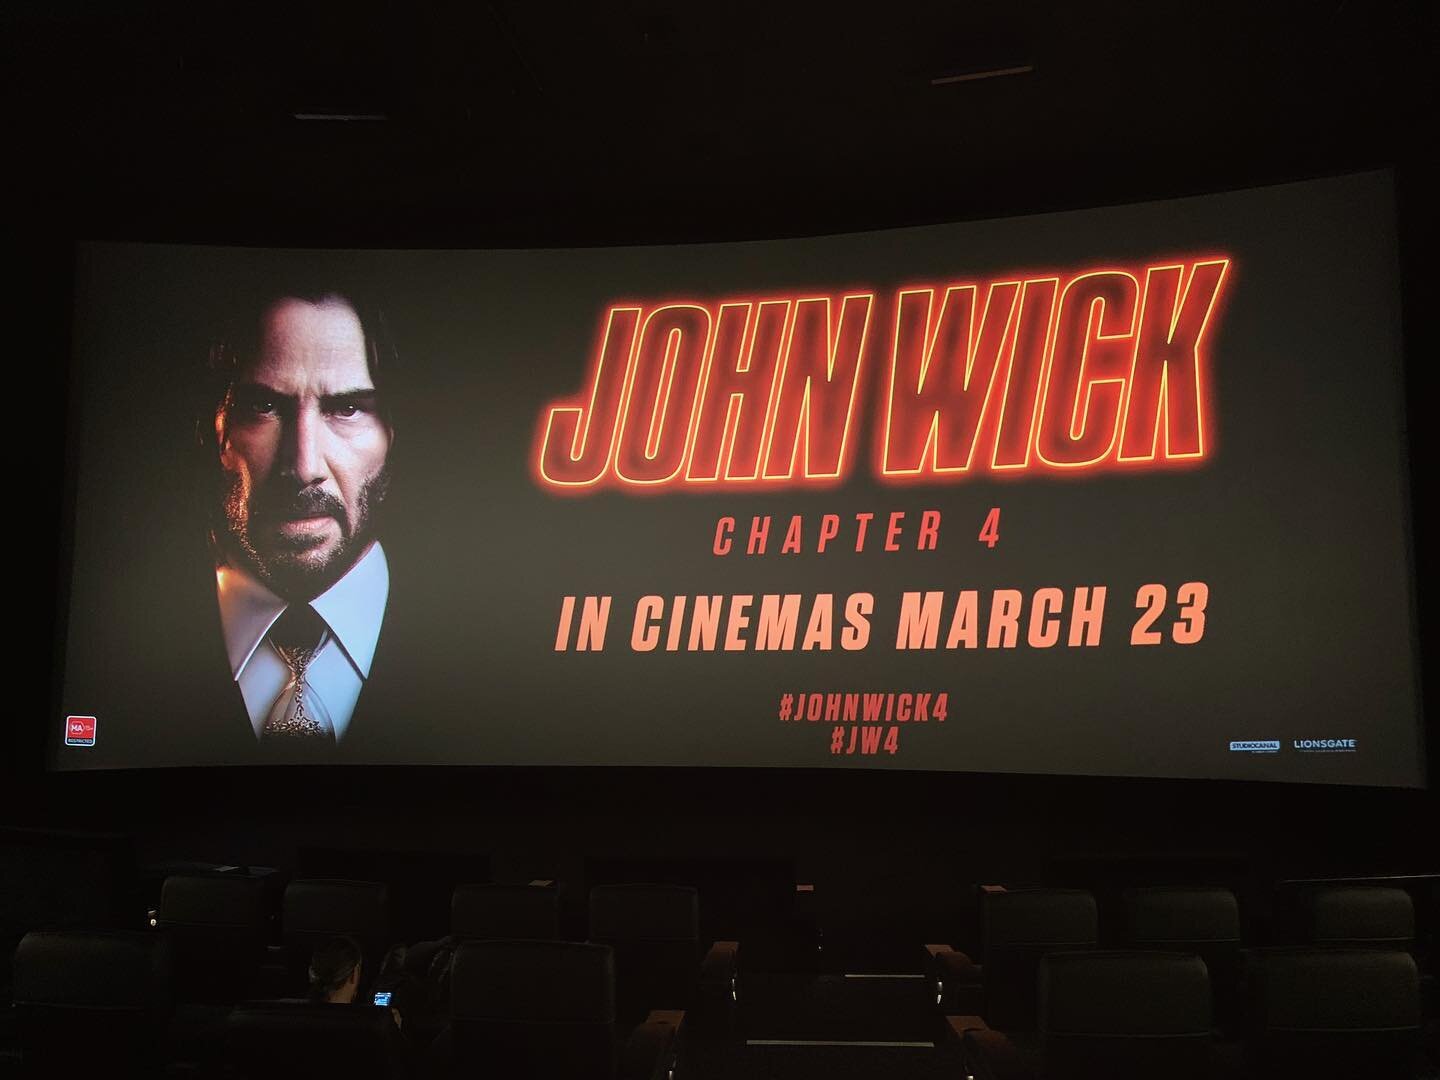 Omg! Omg! Omg! He&rsquo;s back!!! 🥊🥊🥊
Let&rsquo;s see how the High Table feels!
Thanks @studiocanalaus for the screening!!

#johnwick4 #johnwick #actionflick #keanureeves #jw4 #studiocanal #lionsgate #cinemascape #yourshowontheradioaboutthemovies